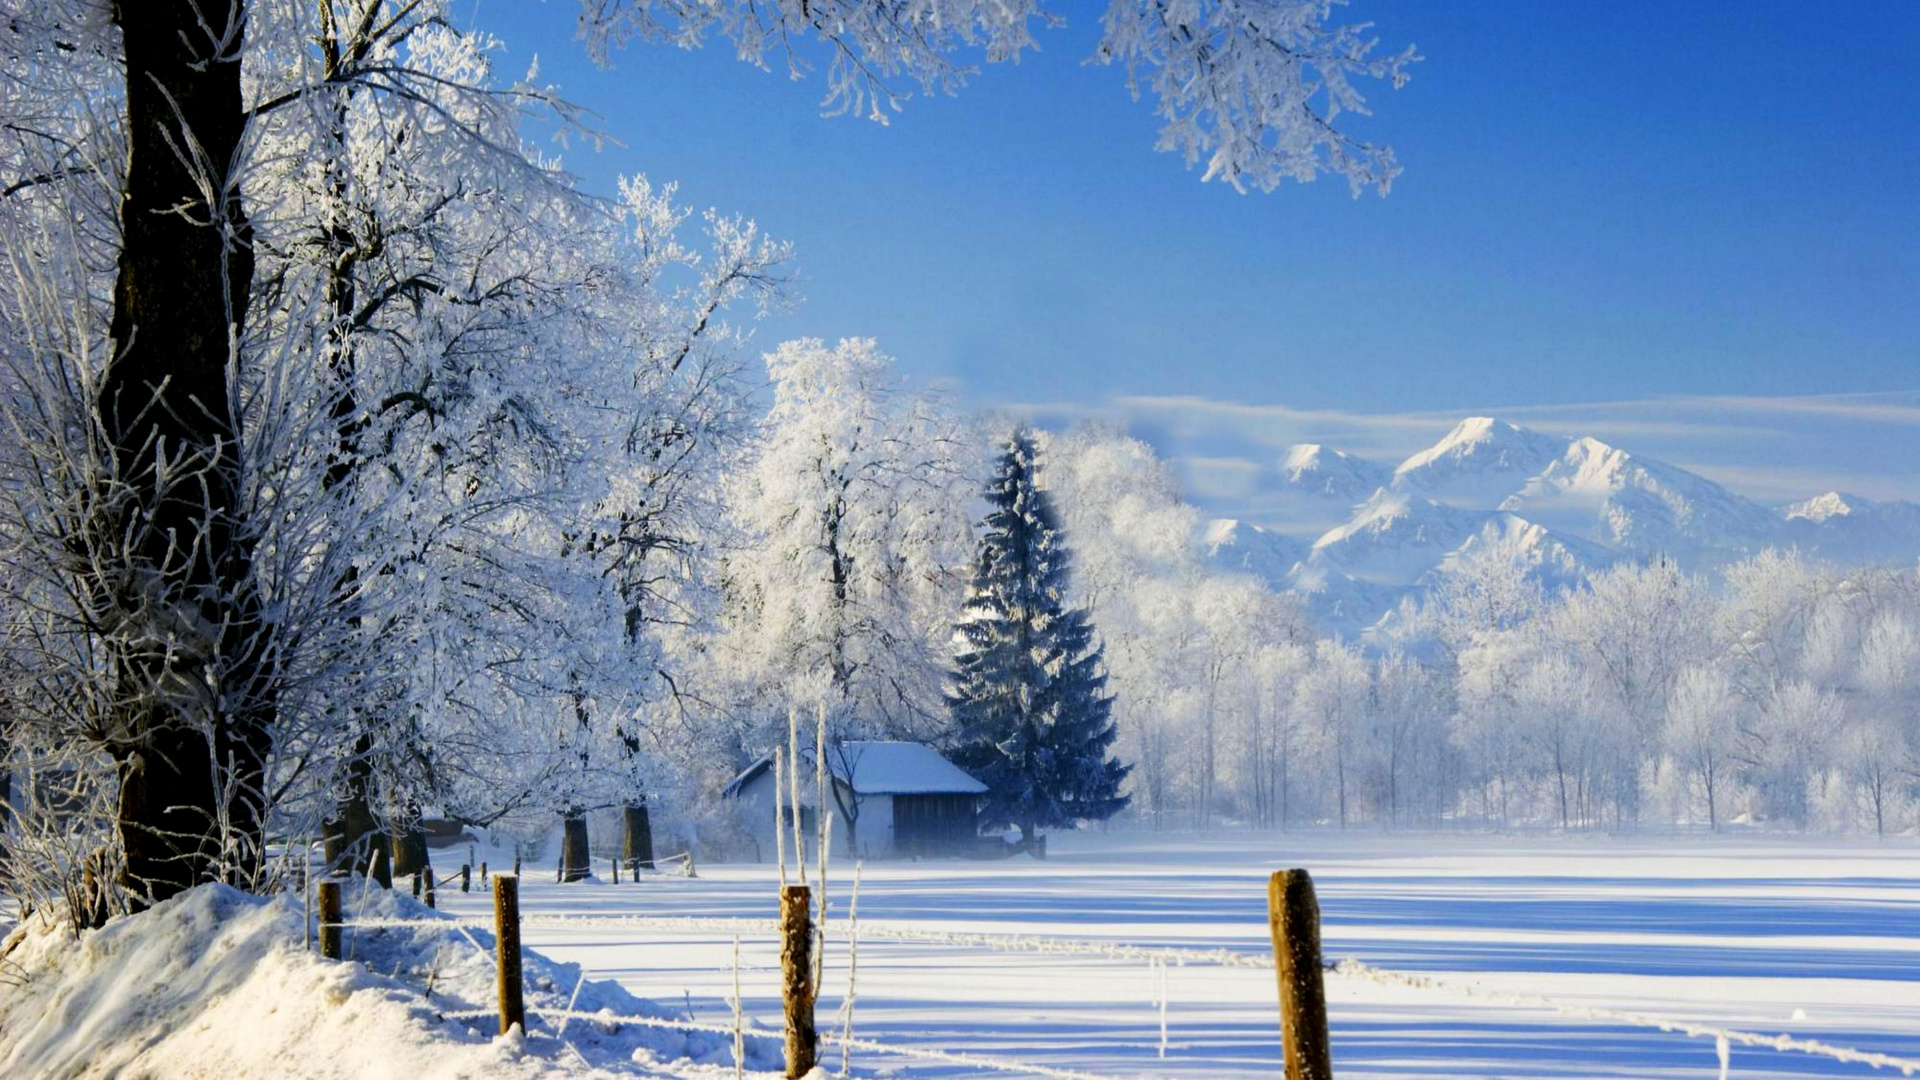 Snow Covered Trees and Mountains Under Blue Sky During Daytime. Wallpaper in 1920x1080 Resolution